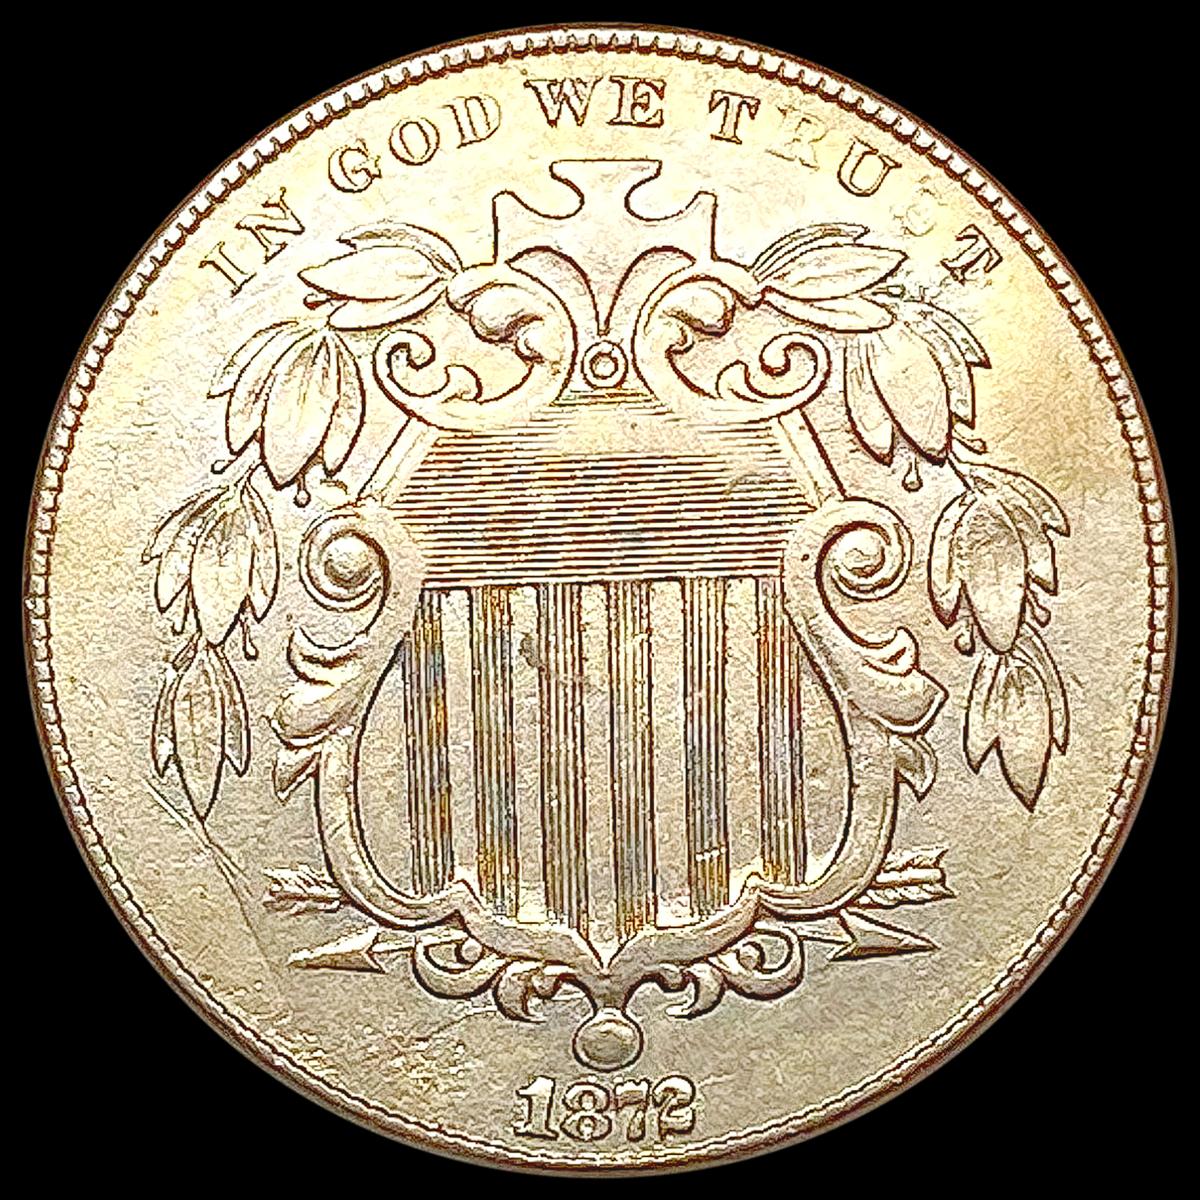 1872 Shield Nickel CLOSELY UNCIRCULATED